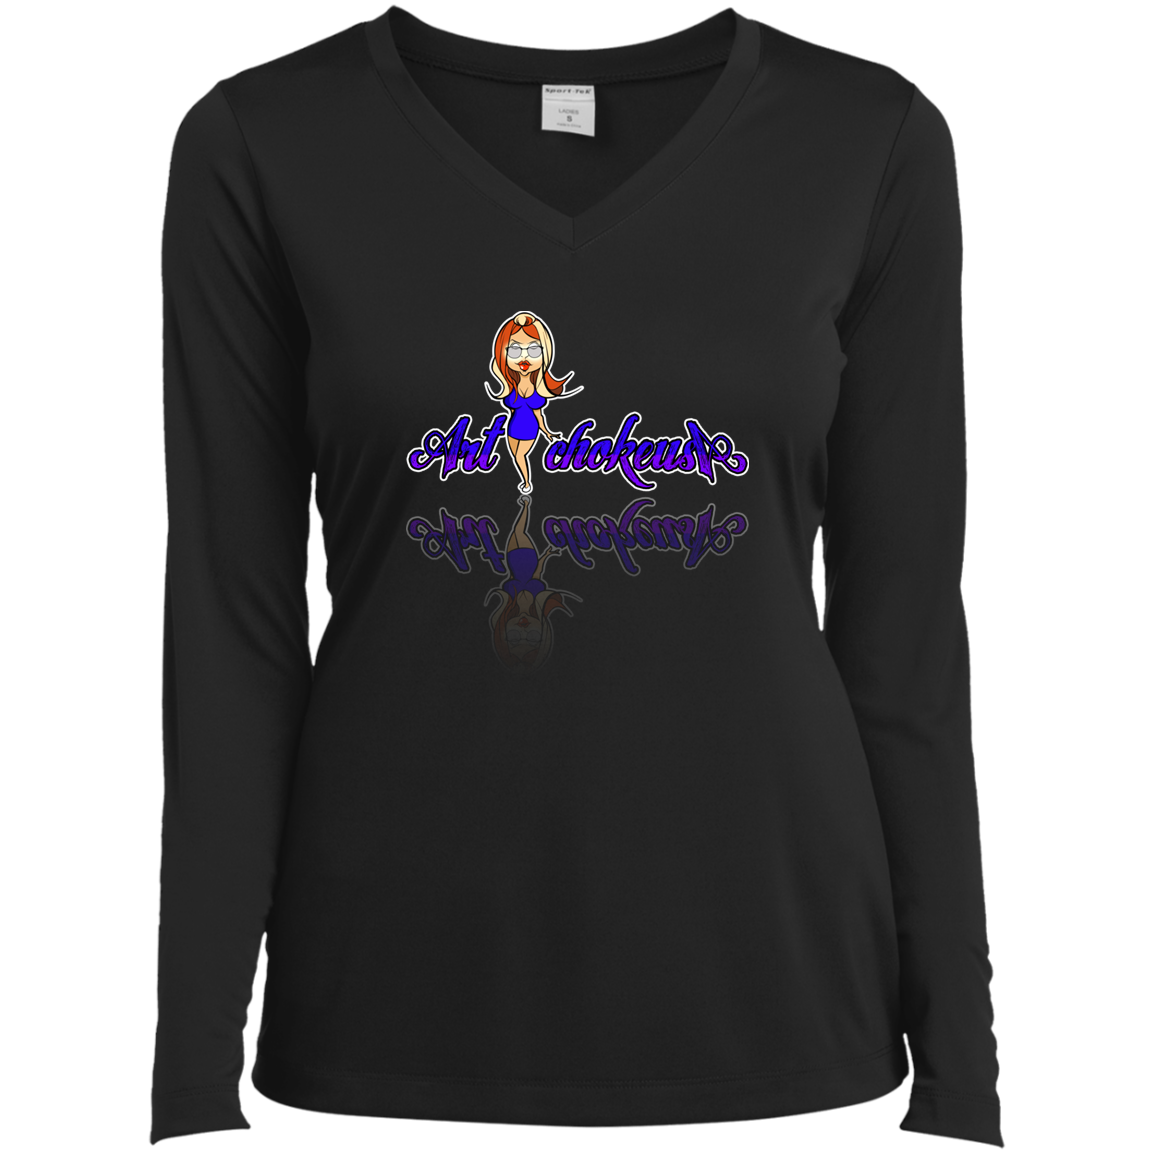 ArtichokeUSA Character and Font Design. Let’s Create Your Own Design Today. Blue Girl. Ladies’ Long Sleeve Performance V-Neck Tee